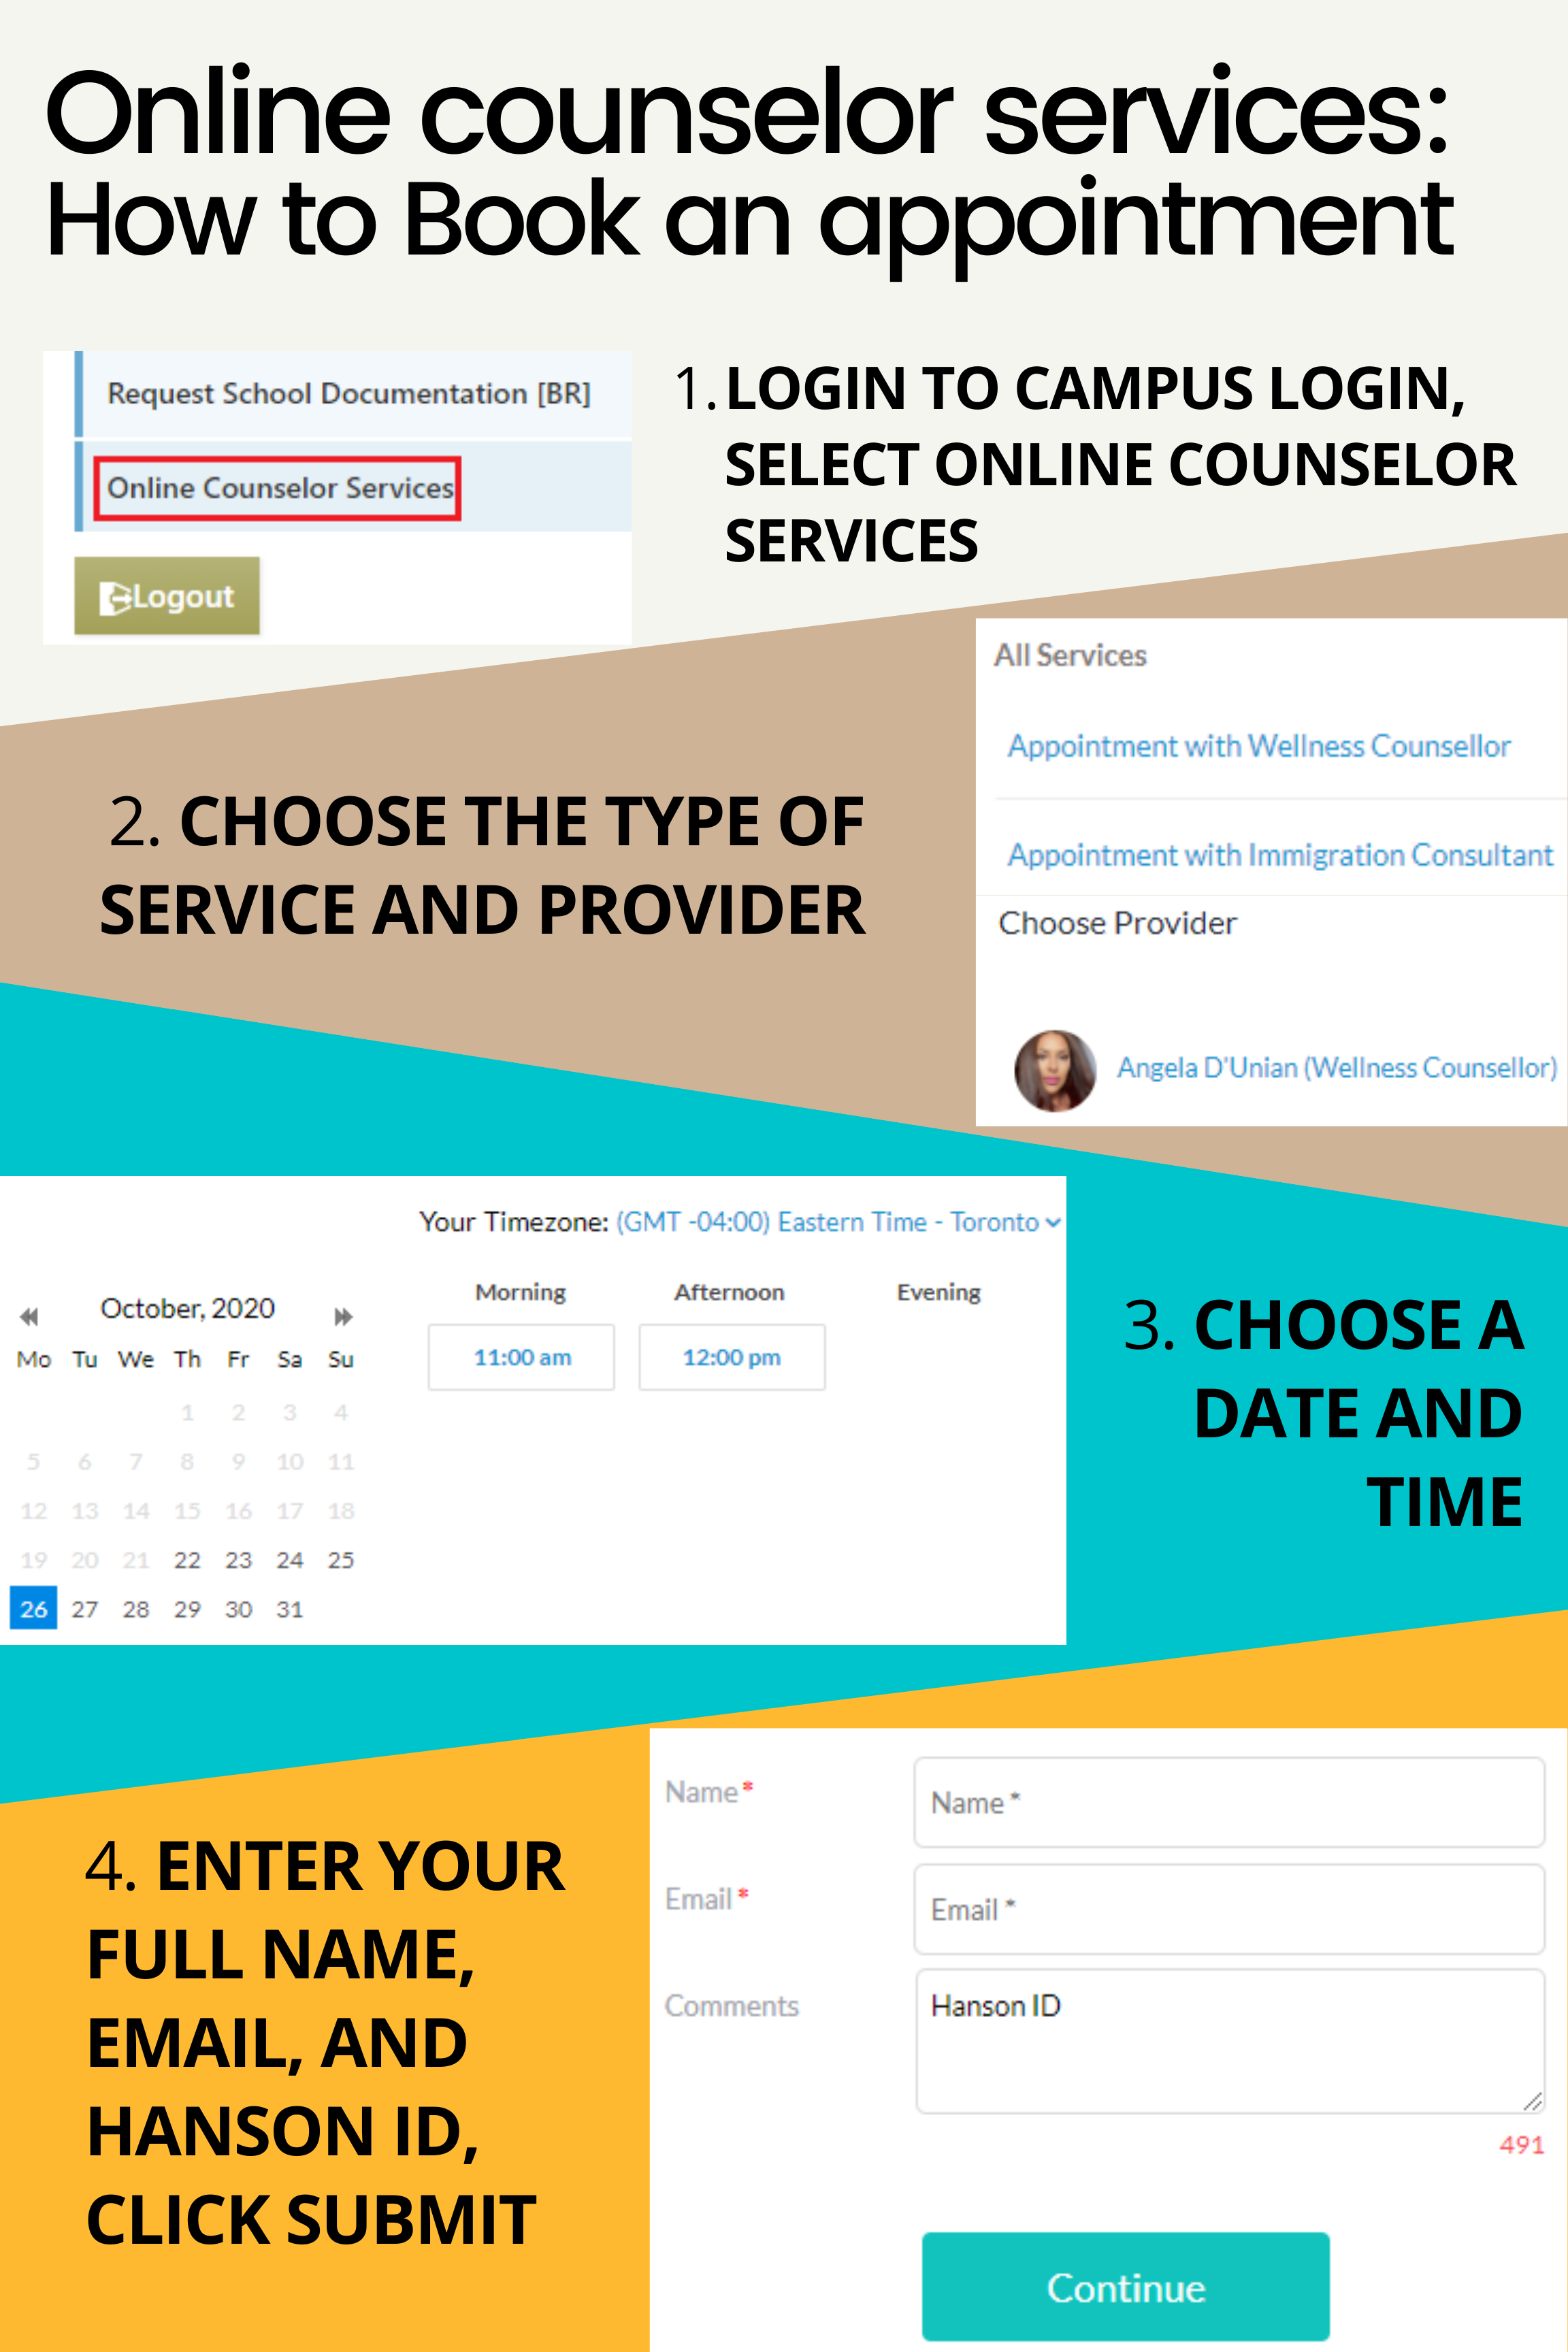 Online Counselor Services: How to Book an Appointment